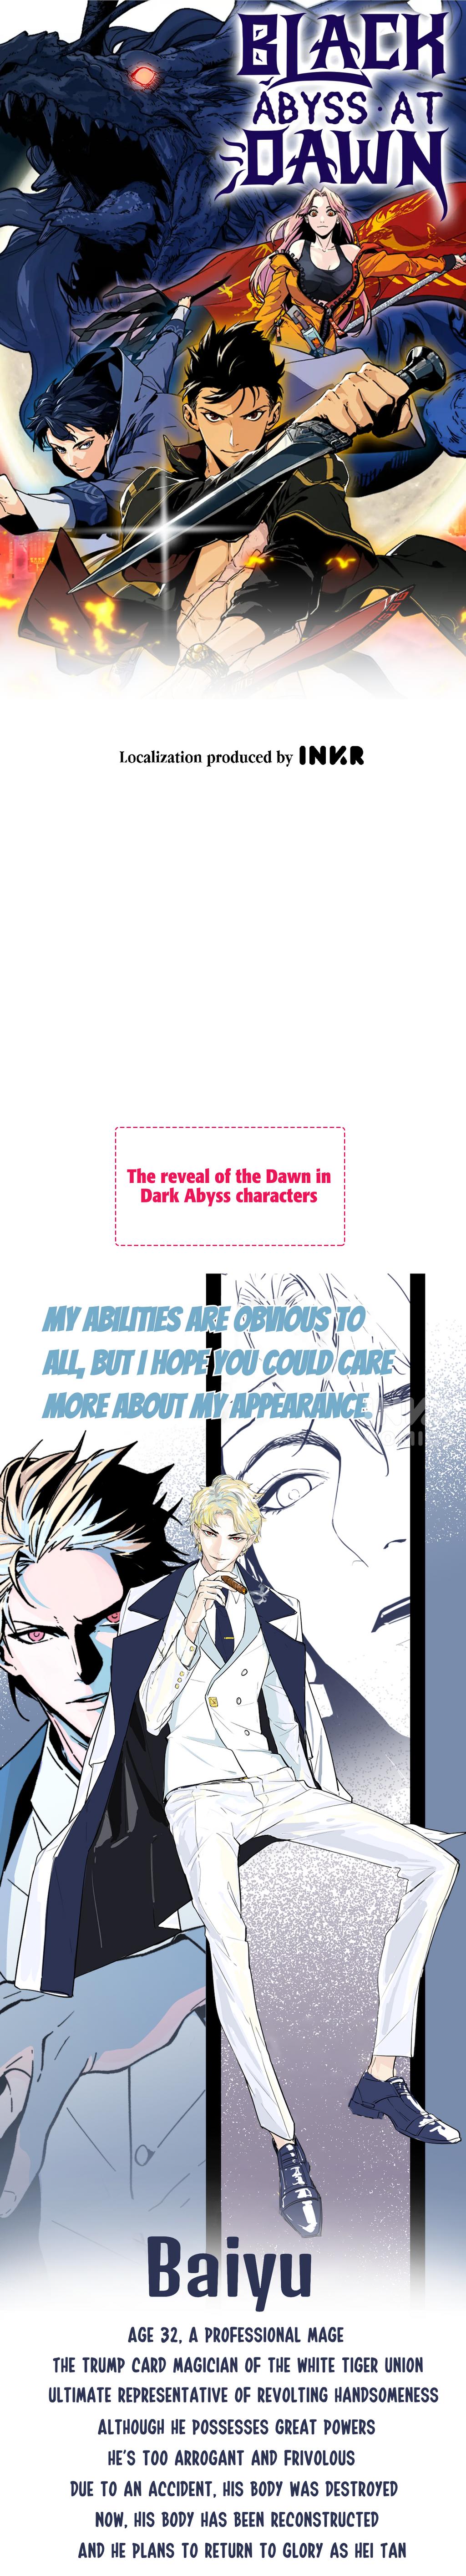 Black Abyss at Dawn 0.1